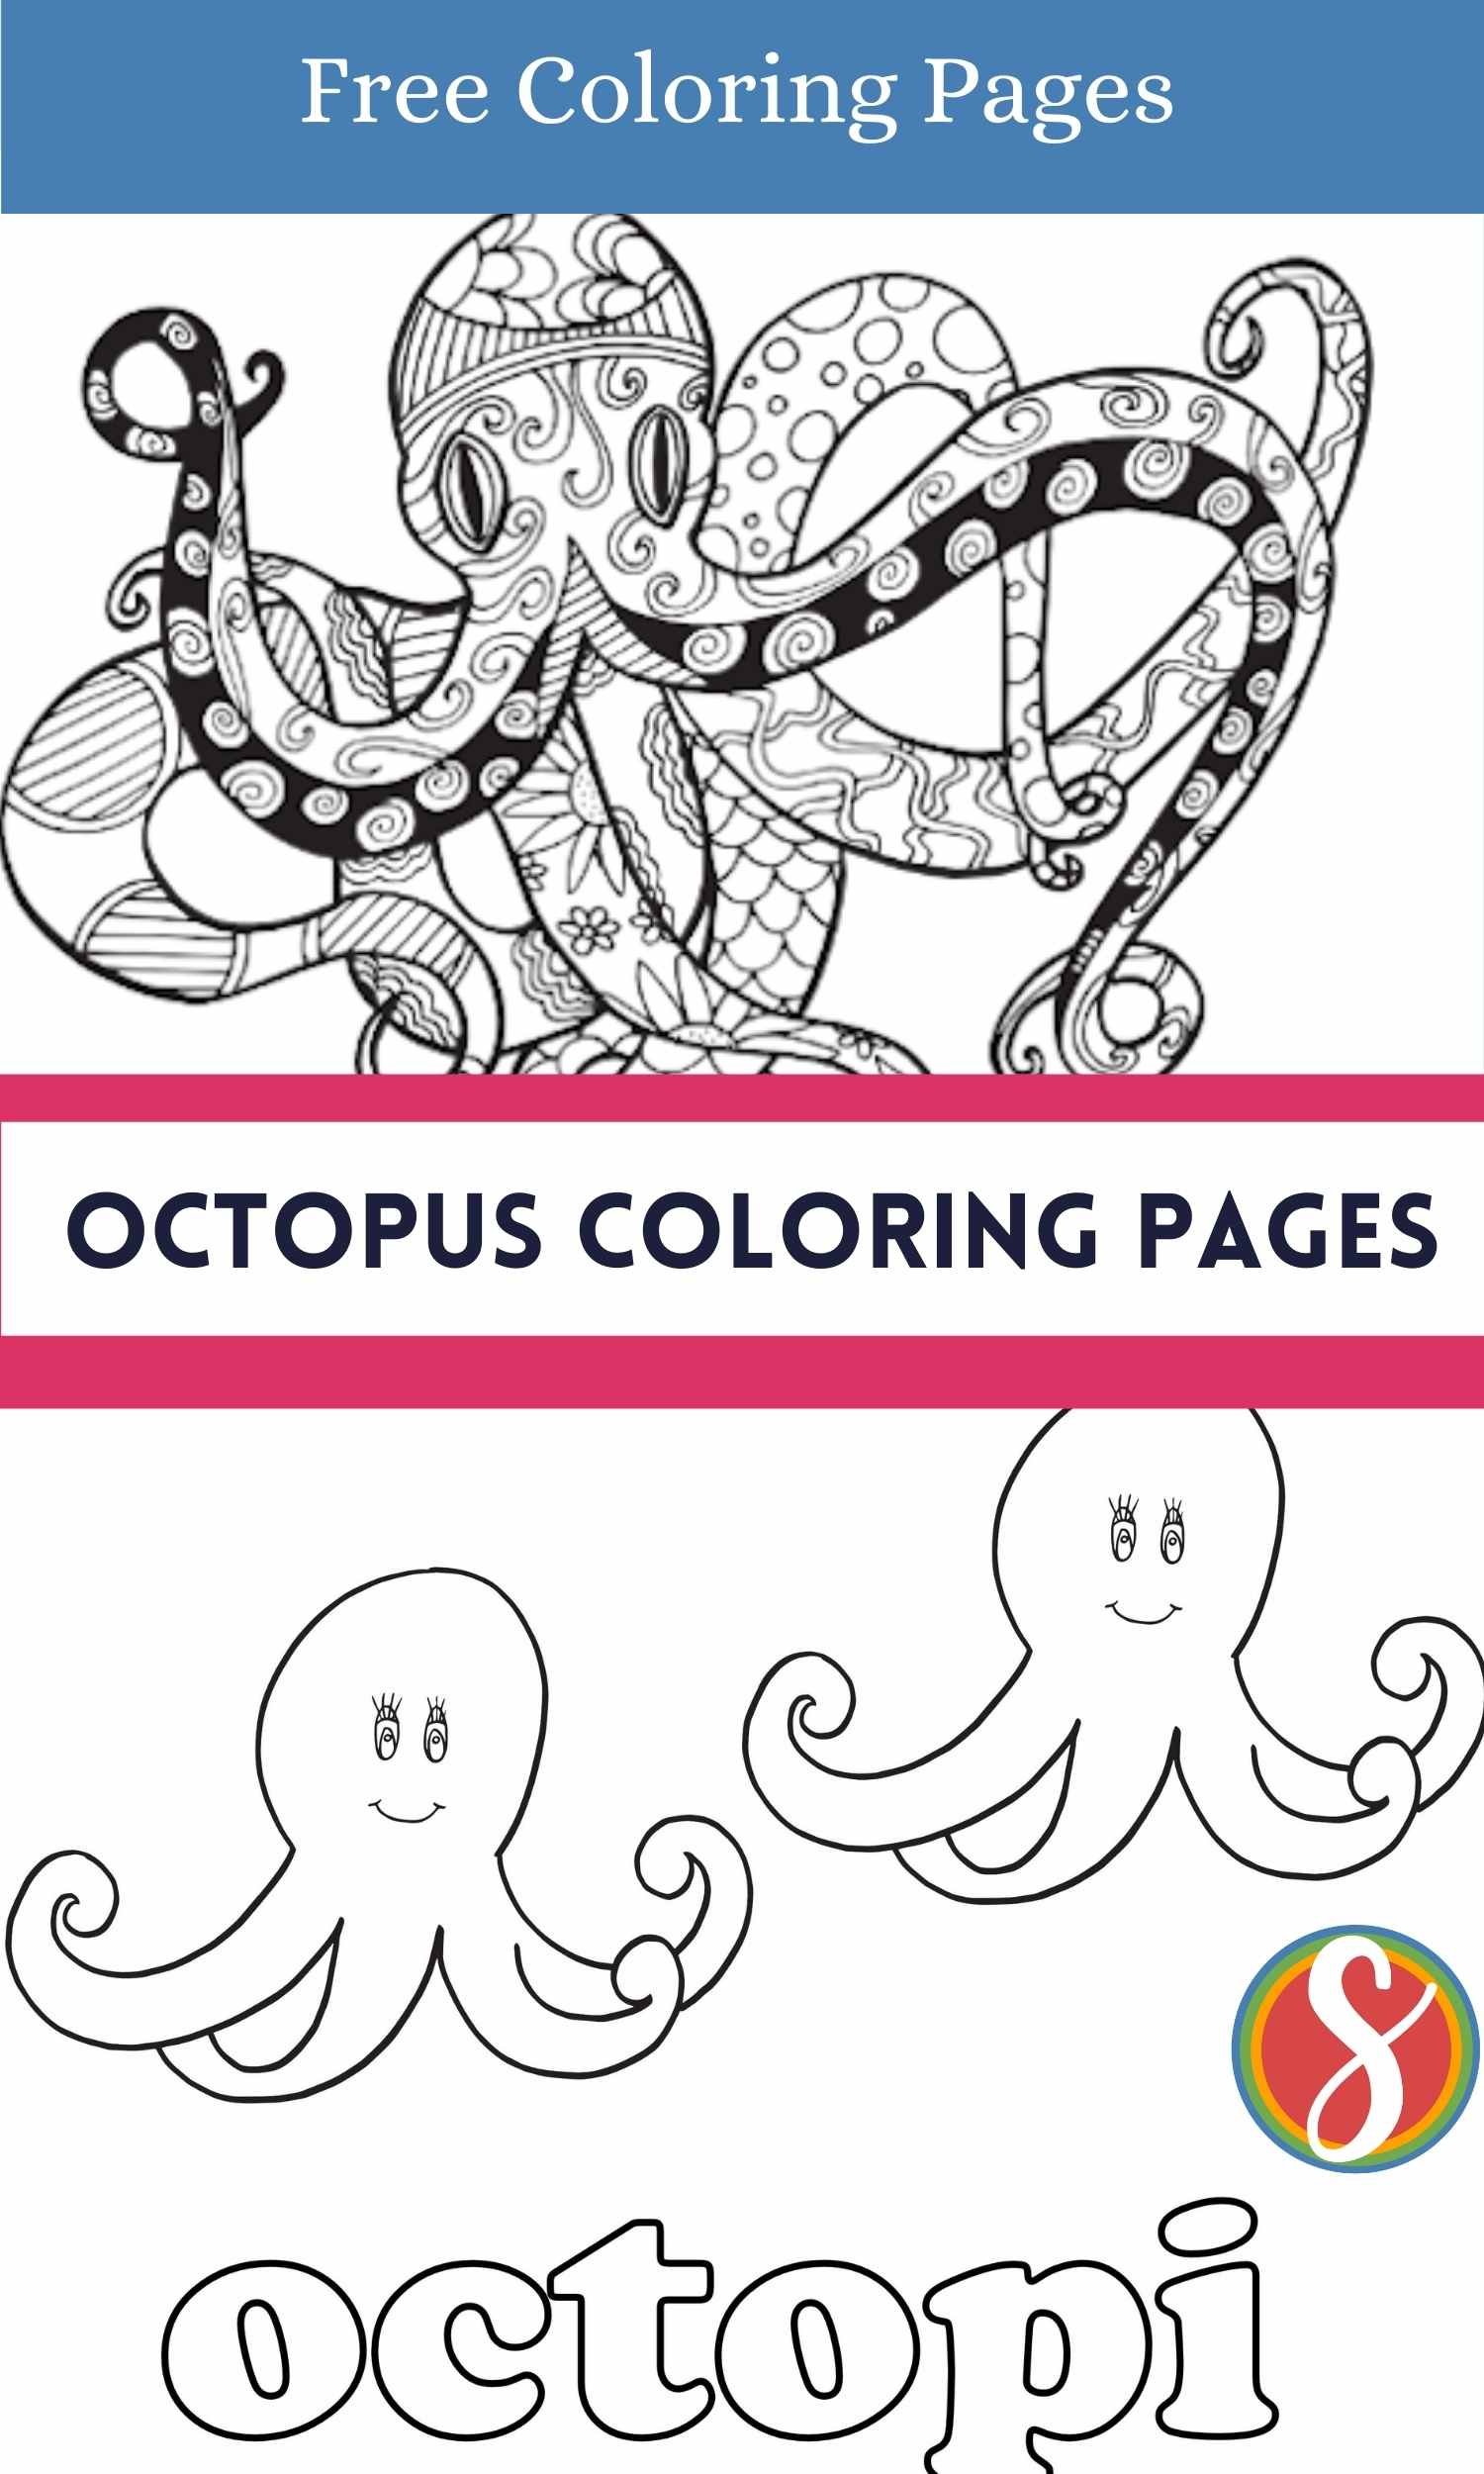 an octopus coloring page full of doodles to color, above a more simple page with two octopus outlines